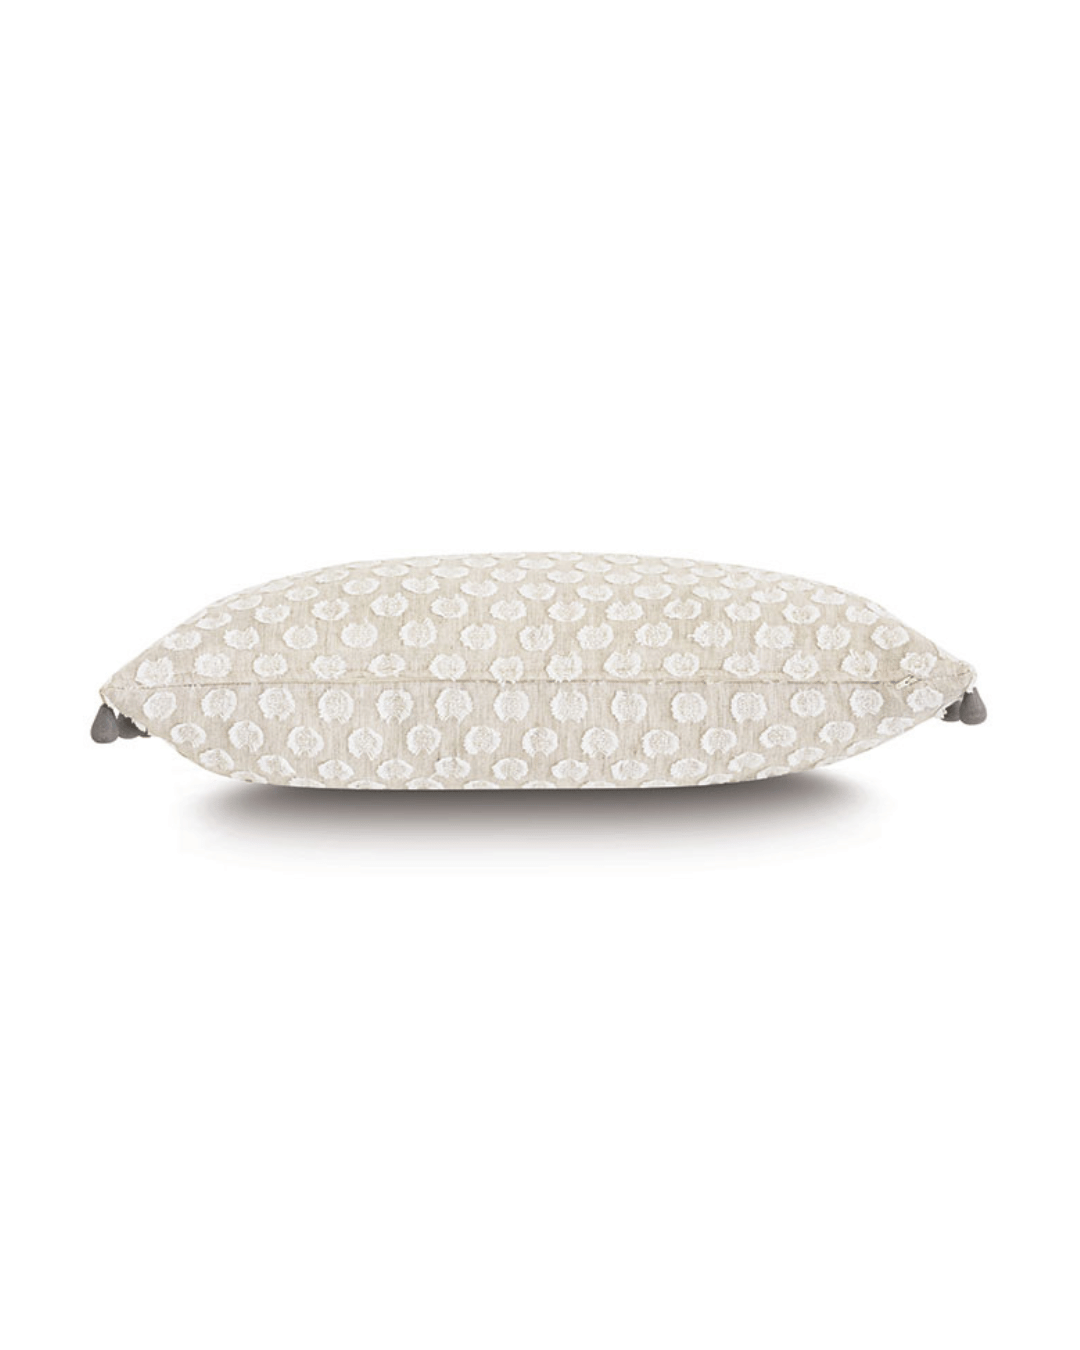 Eastern Accents&#39; Beaded Trim Decorative Pillow with a textured white cover featuring a dotted pattern, displayed in a bungalow-style against a plain white background.